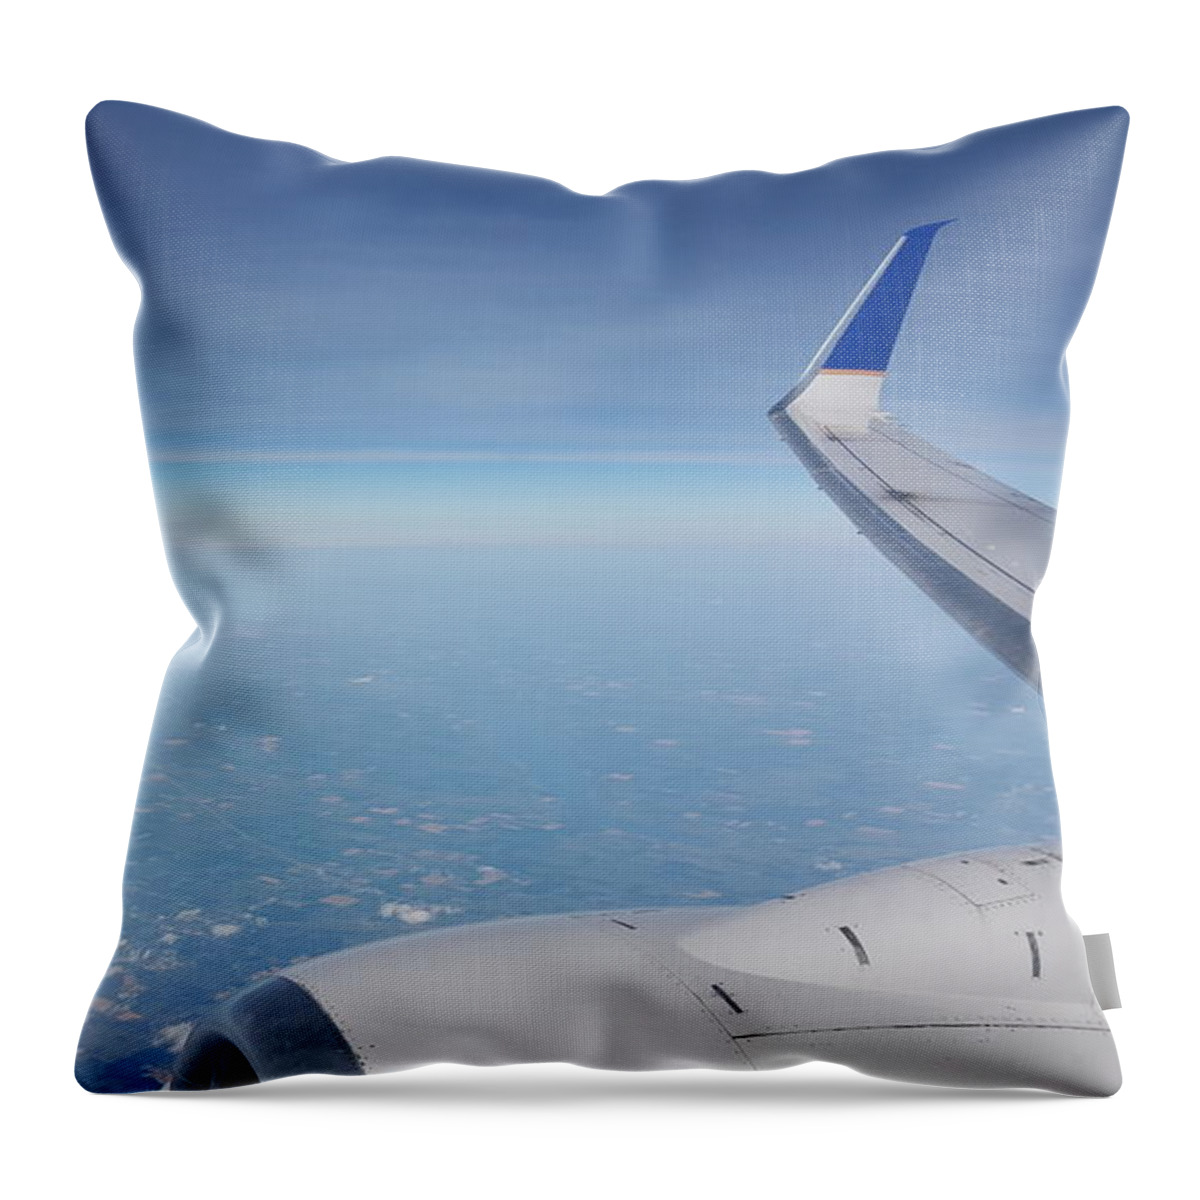 Plane Throw Pillow featuring the photograph One Who Flies by Britten Adams